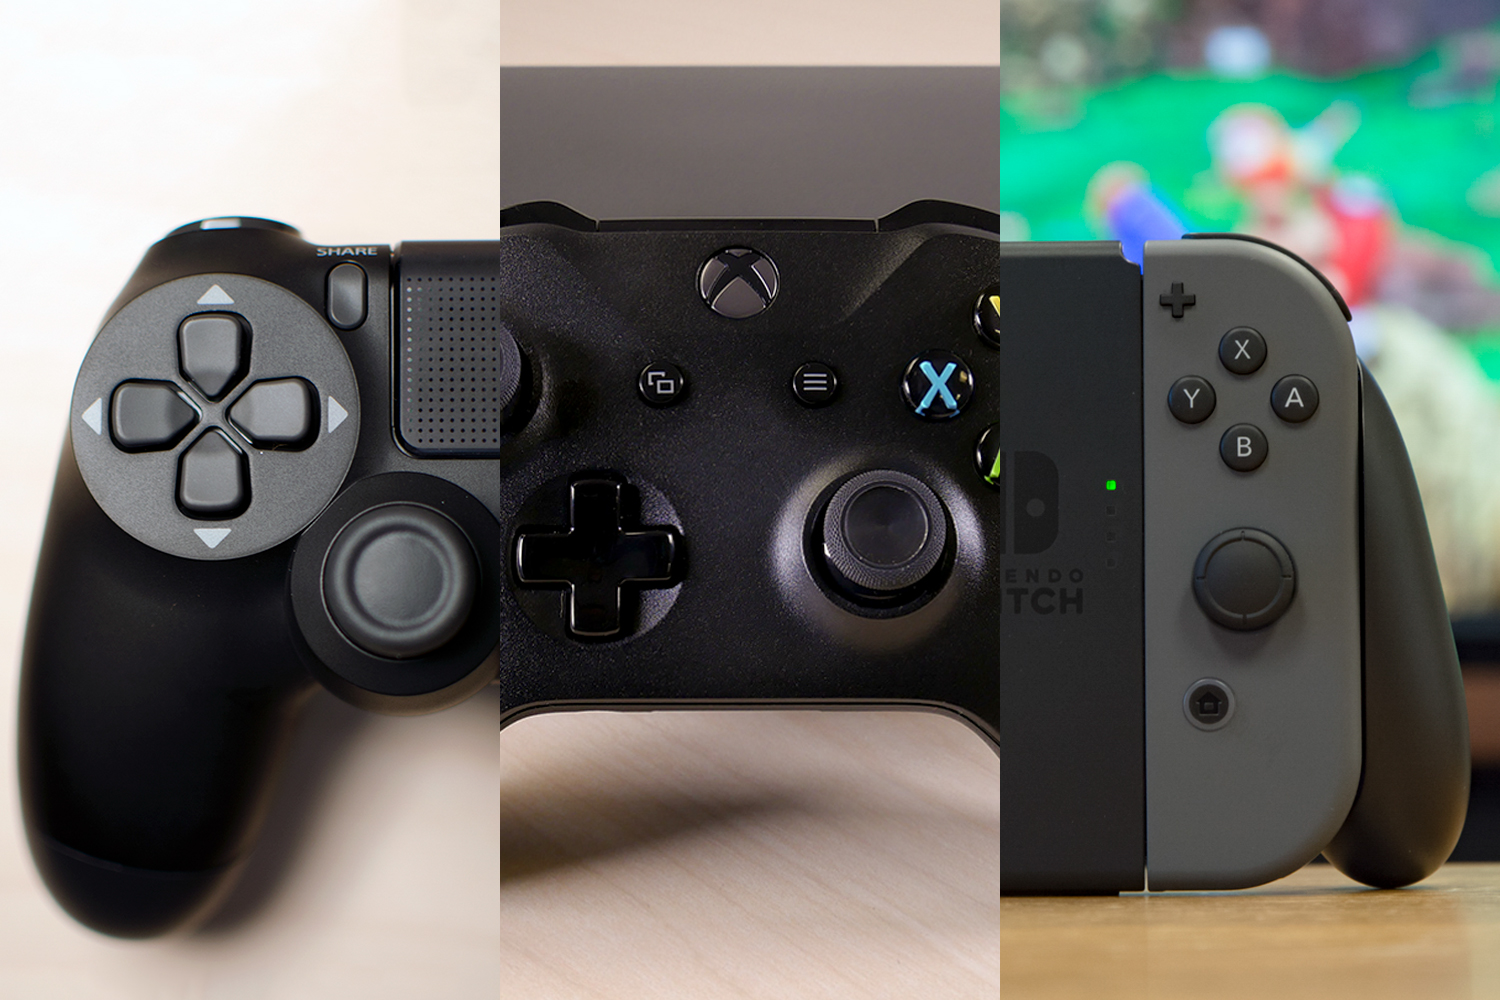 We finally know how many Xbox One consoles Microsoft sold compared to PS4